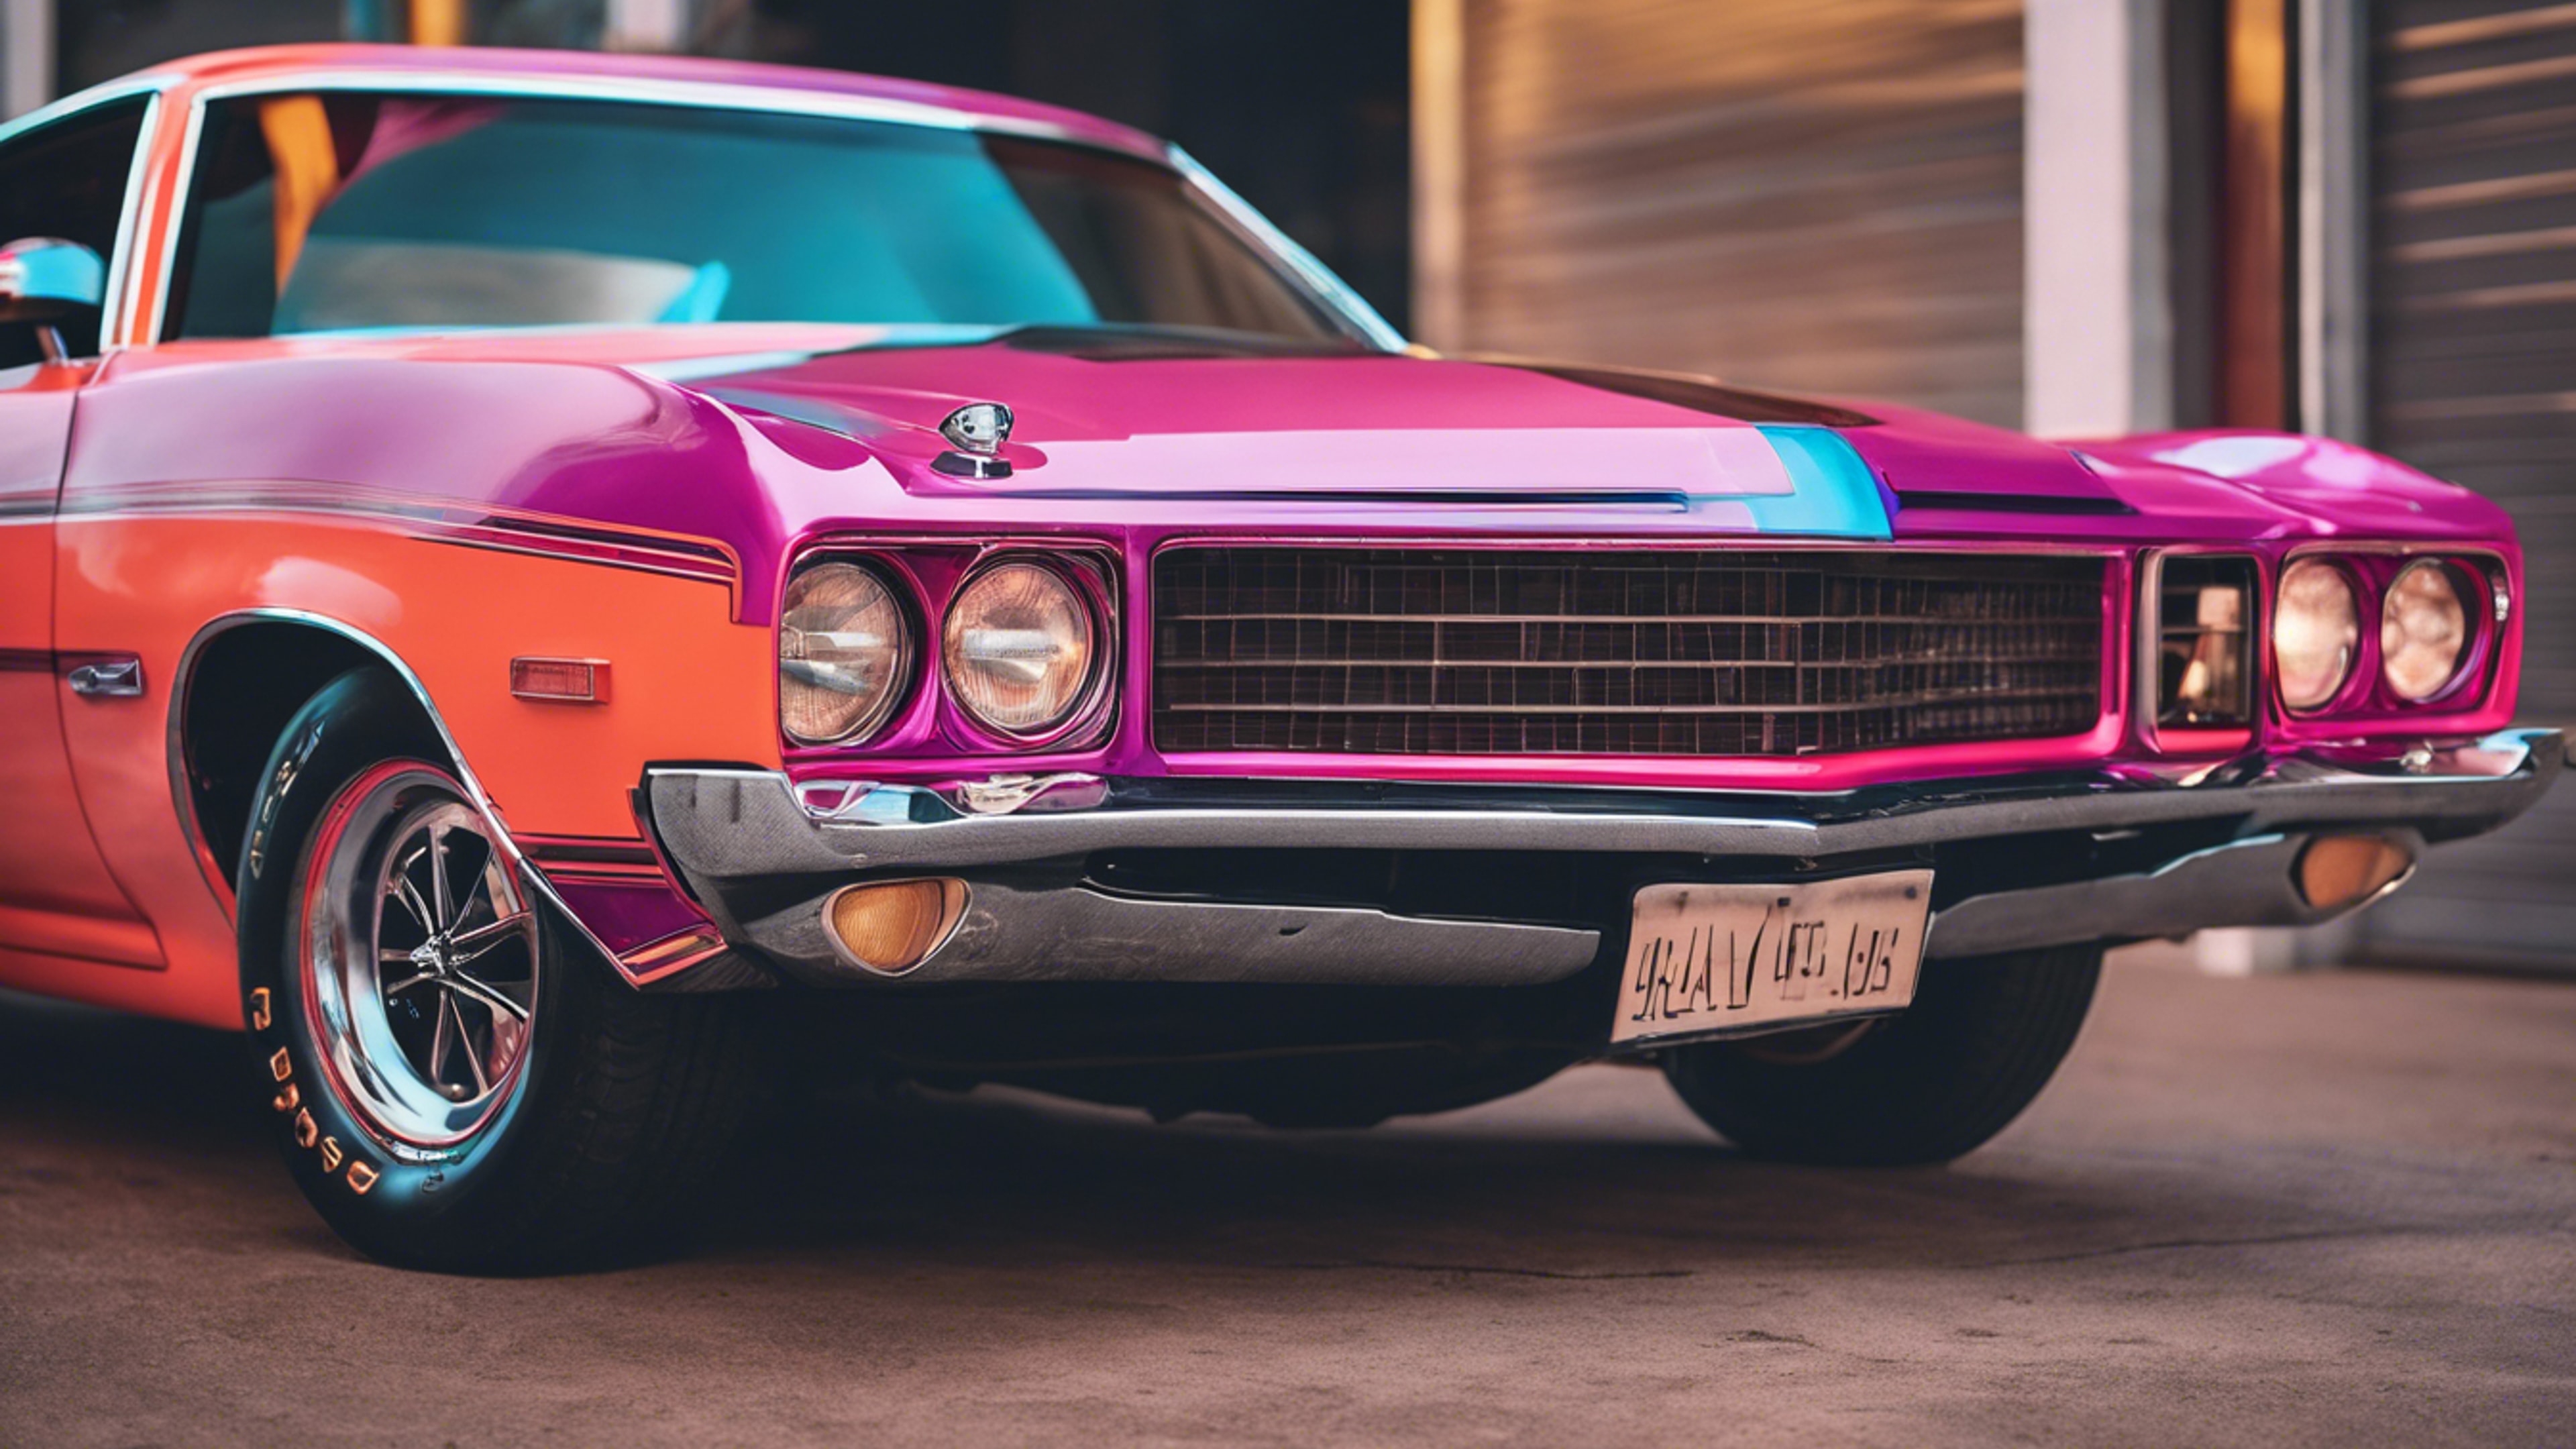 A classic American muscle car from the 1970s, printed in bright neon colors Ფონი[fa60d4cf89e348ffade4]